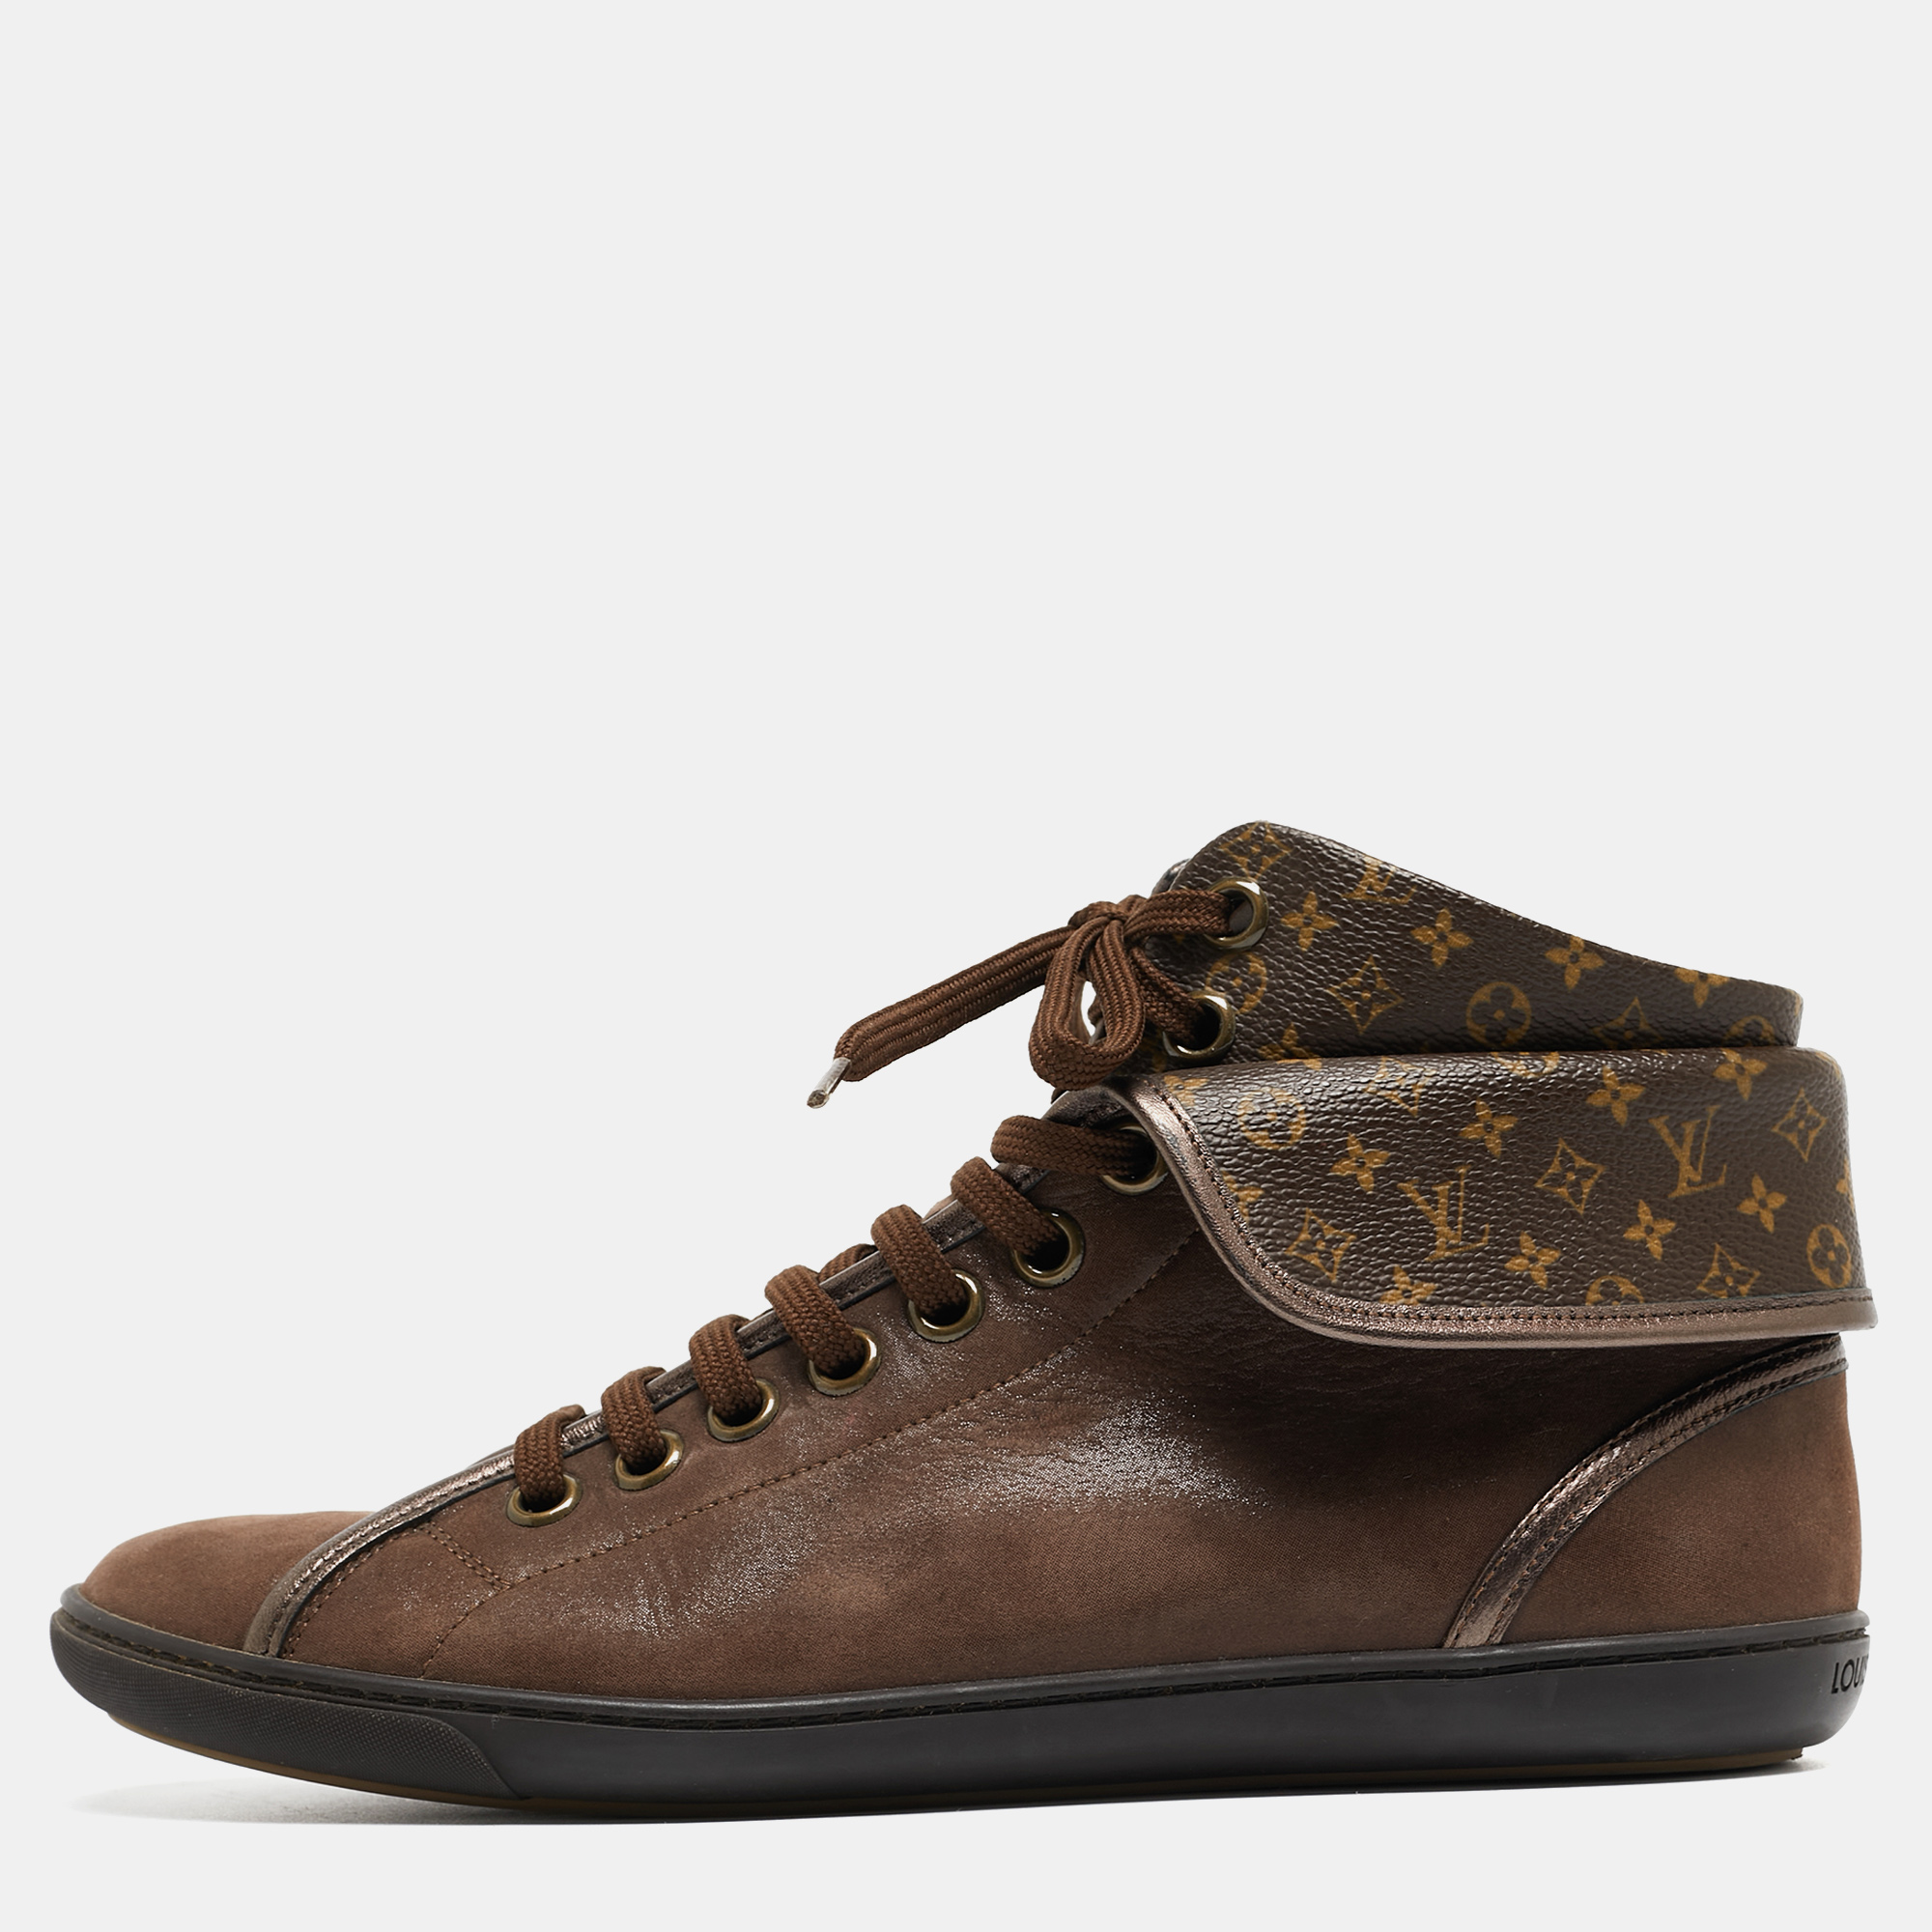 Louis vuitton brown monogram canvas and  leather brea sneakers size 38.5